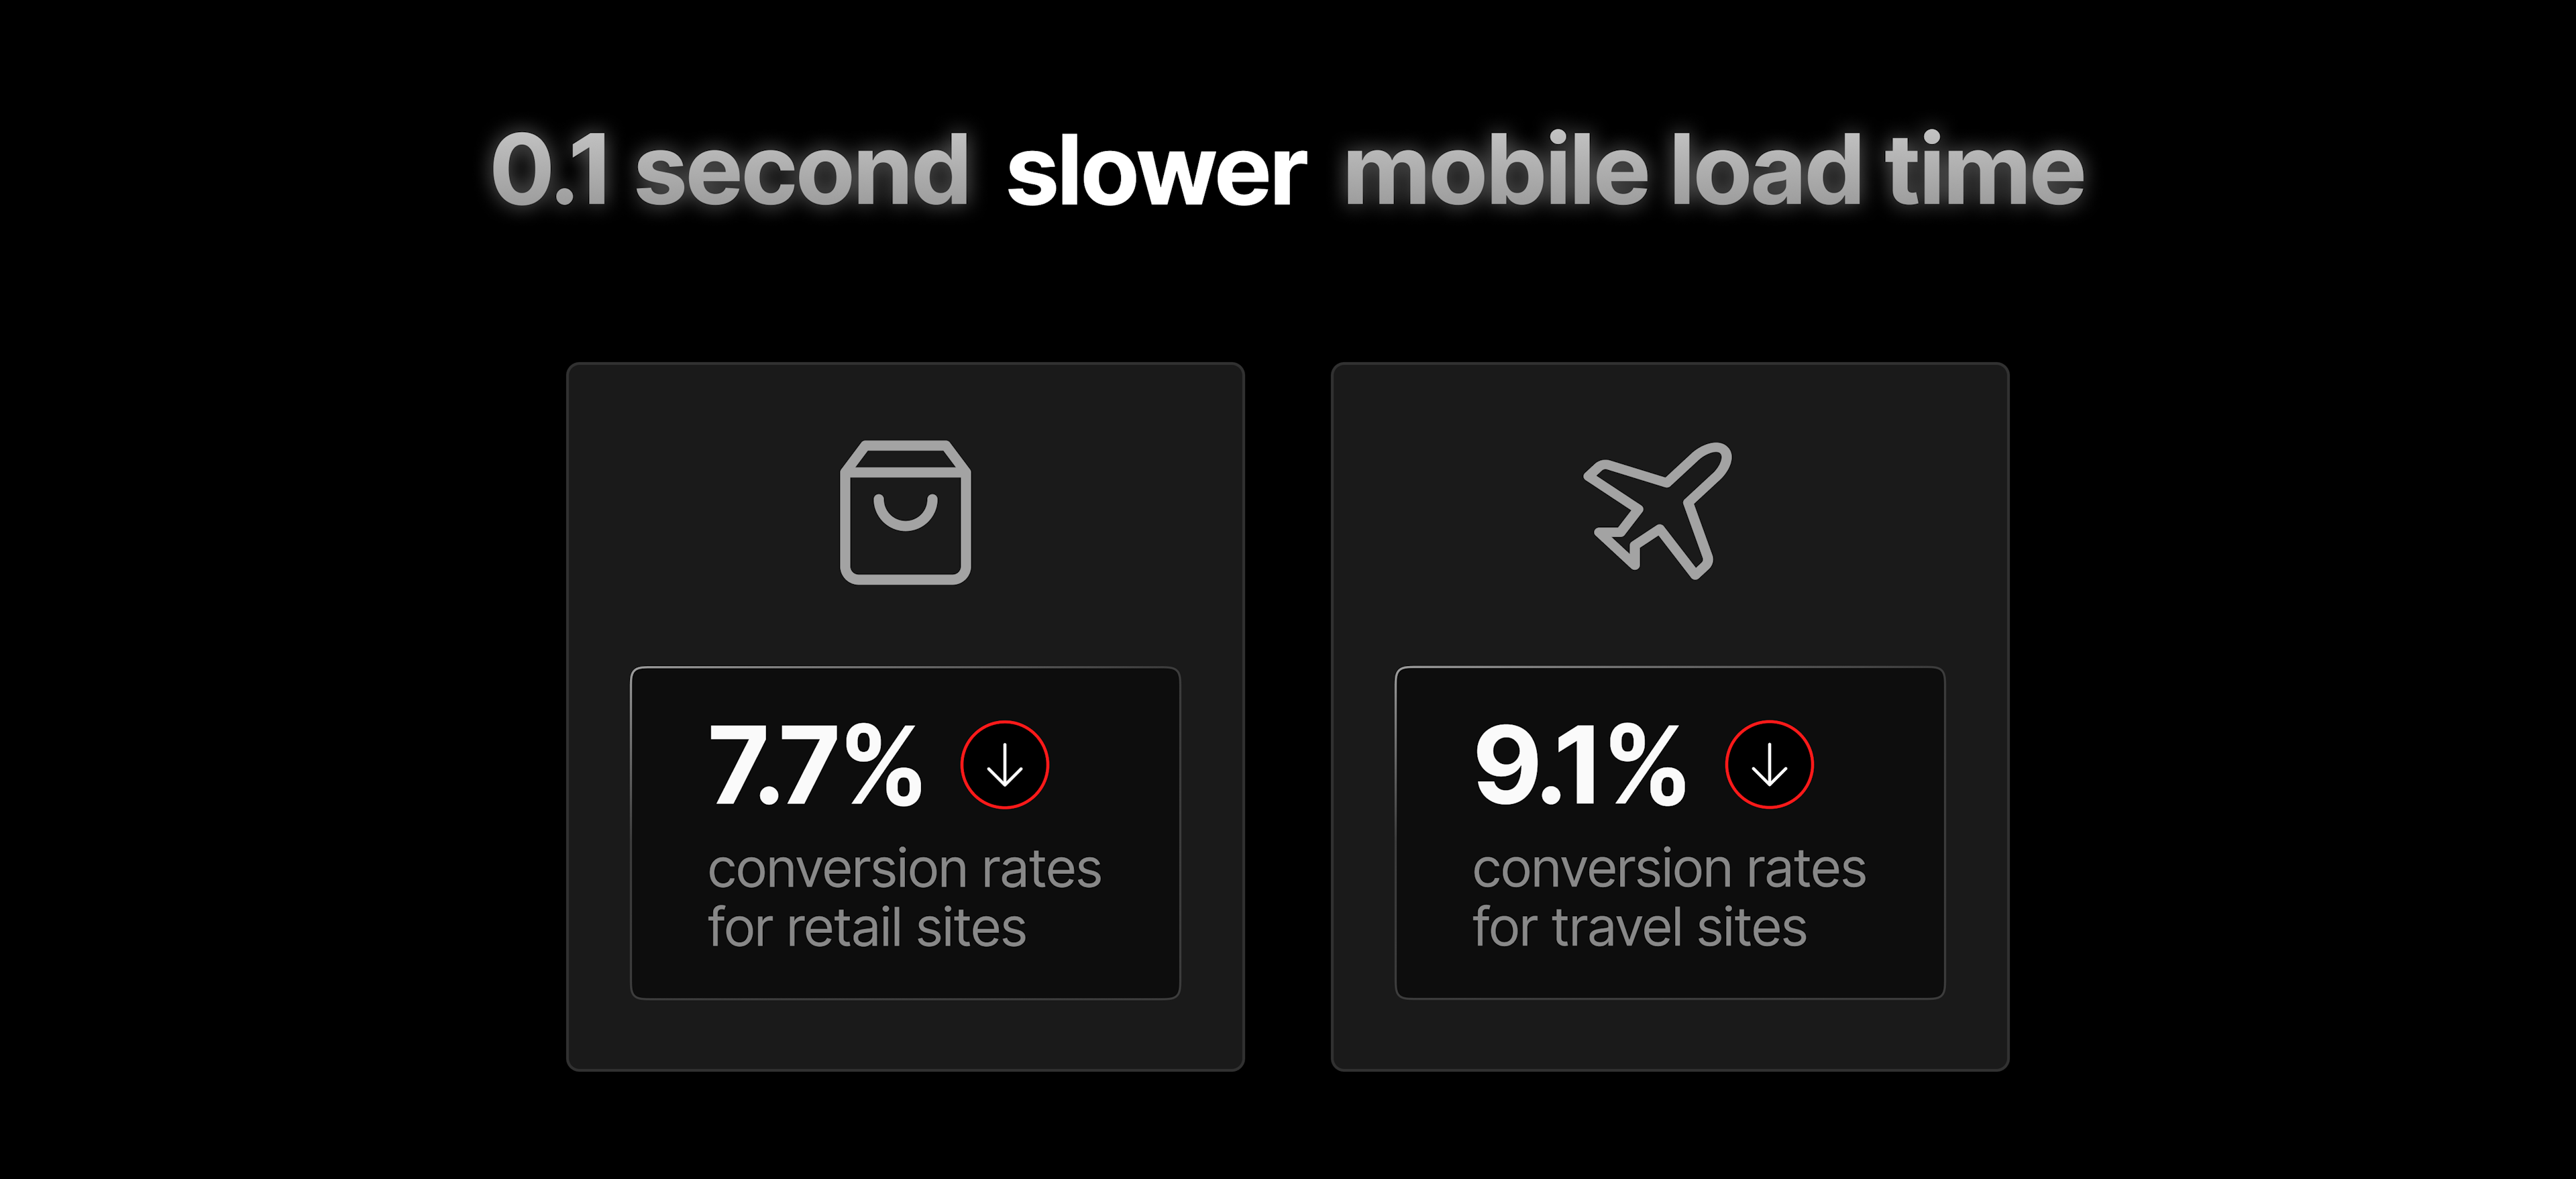 Slow load times have direct impact on user behavior.¹